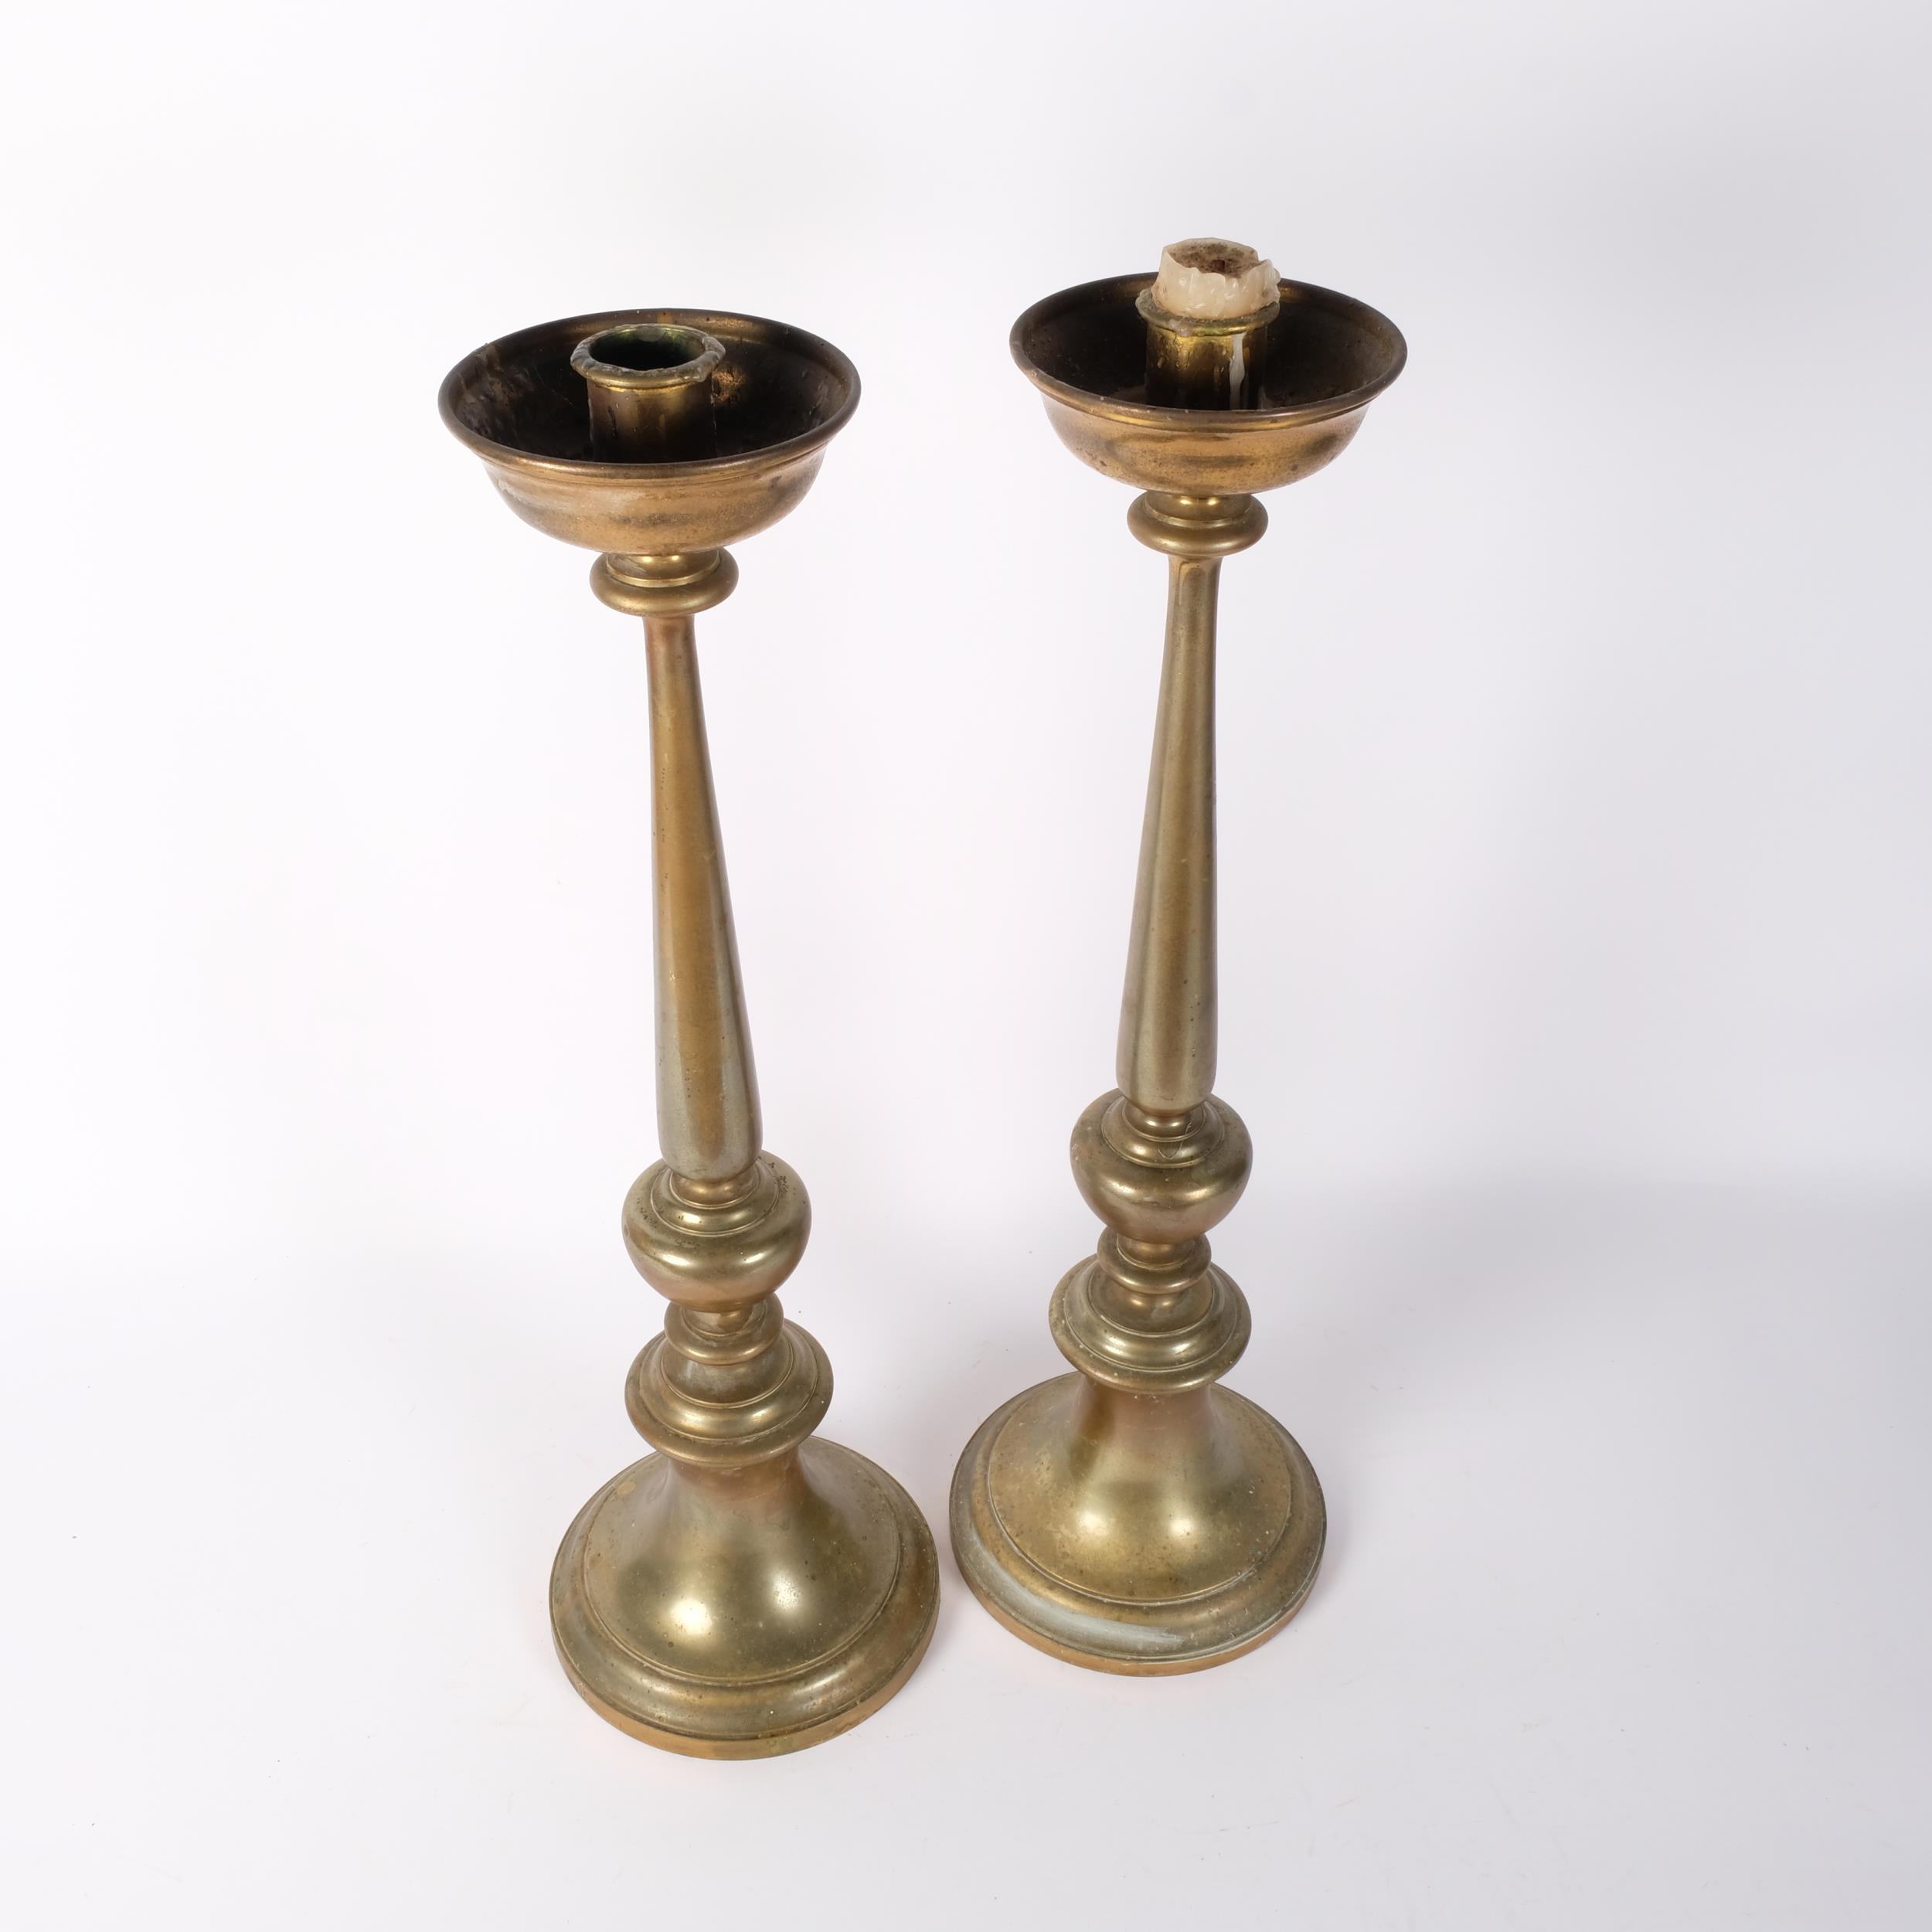 A pair of Vintage turned brass candlesticks, 54cm - Image 2 of 2